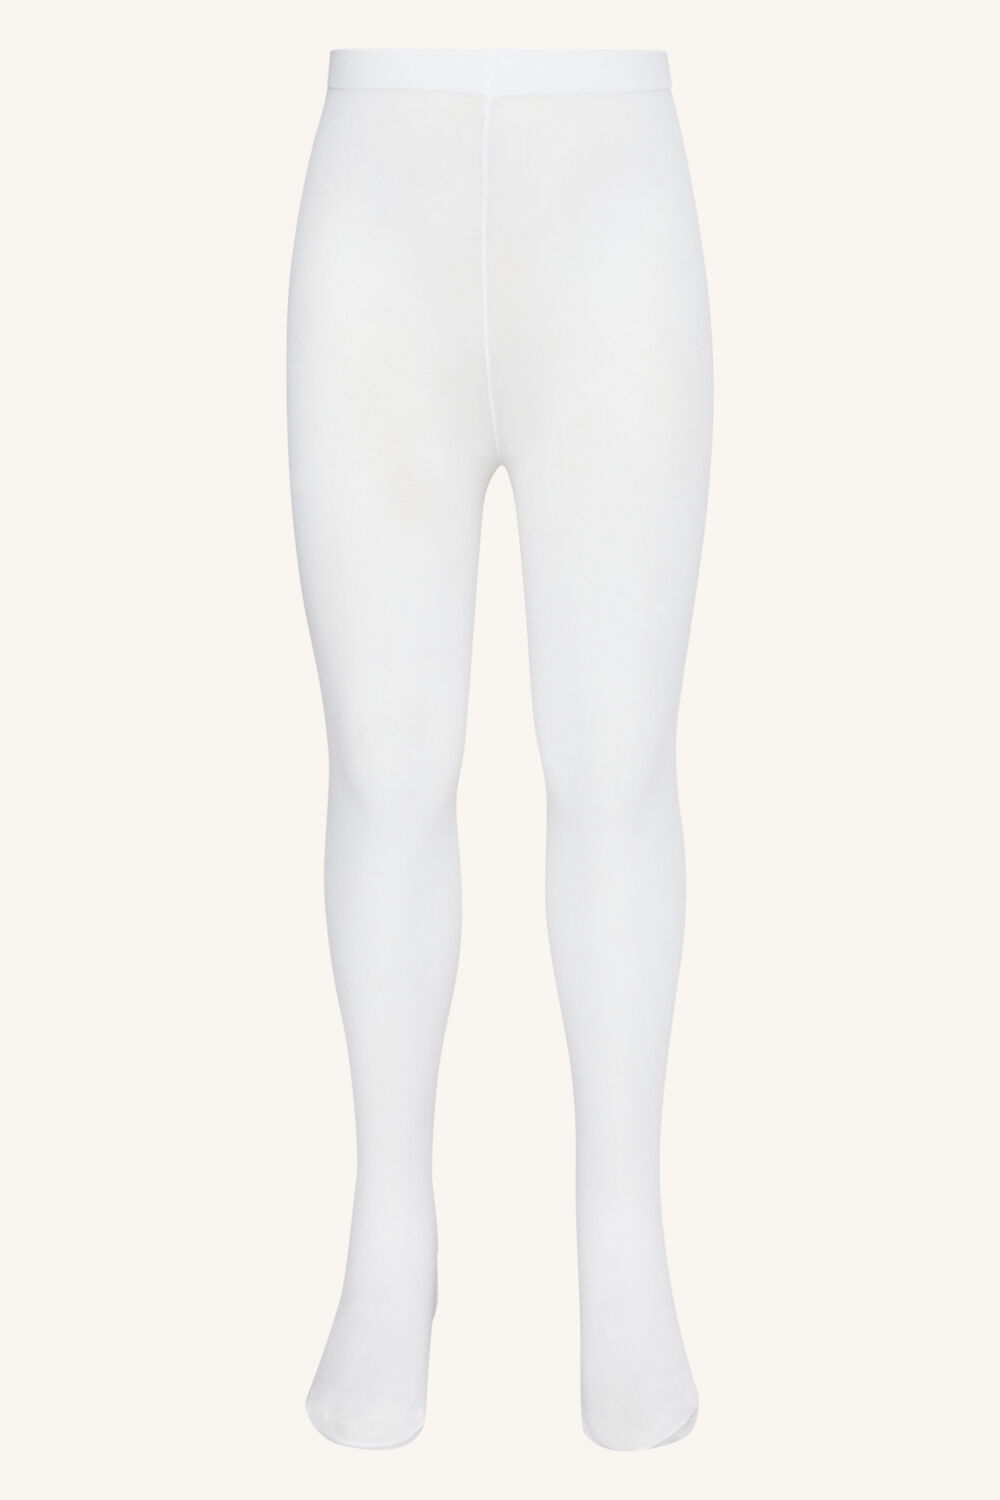 BABY GIRL OPAQUE TIGHTS  in colour BRIGHT WHITE